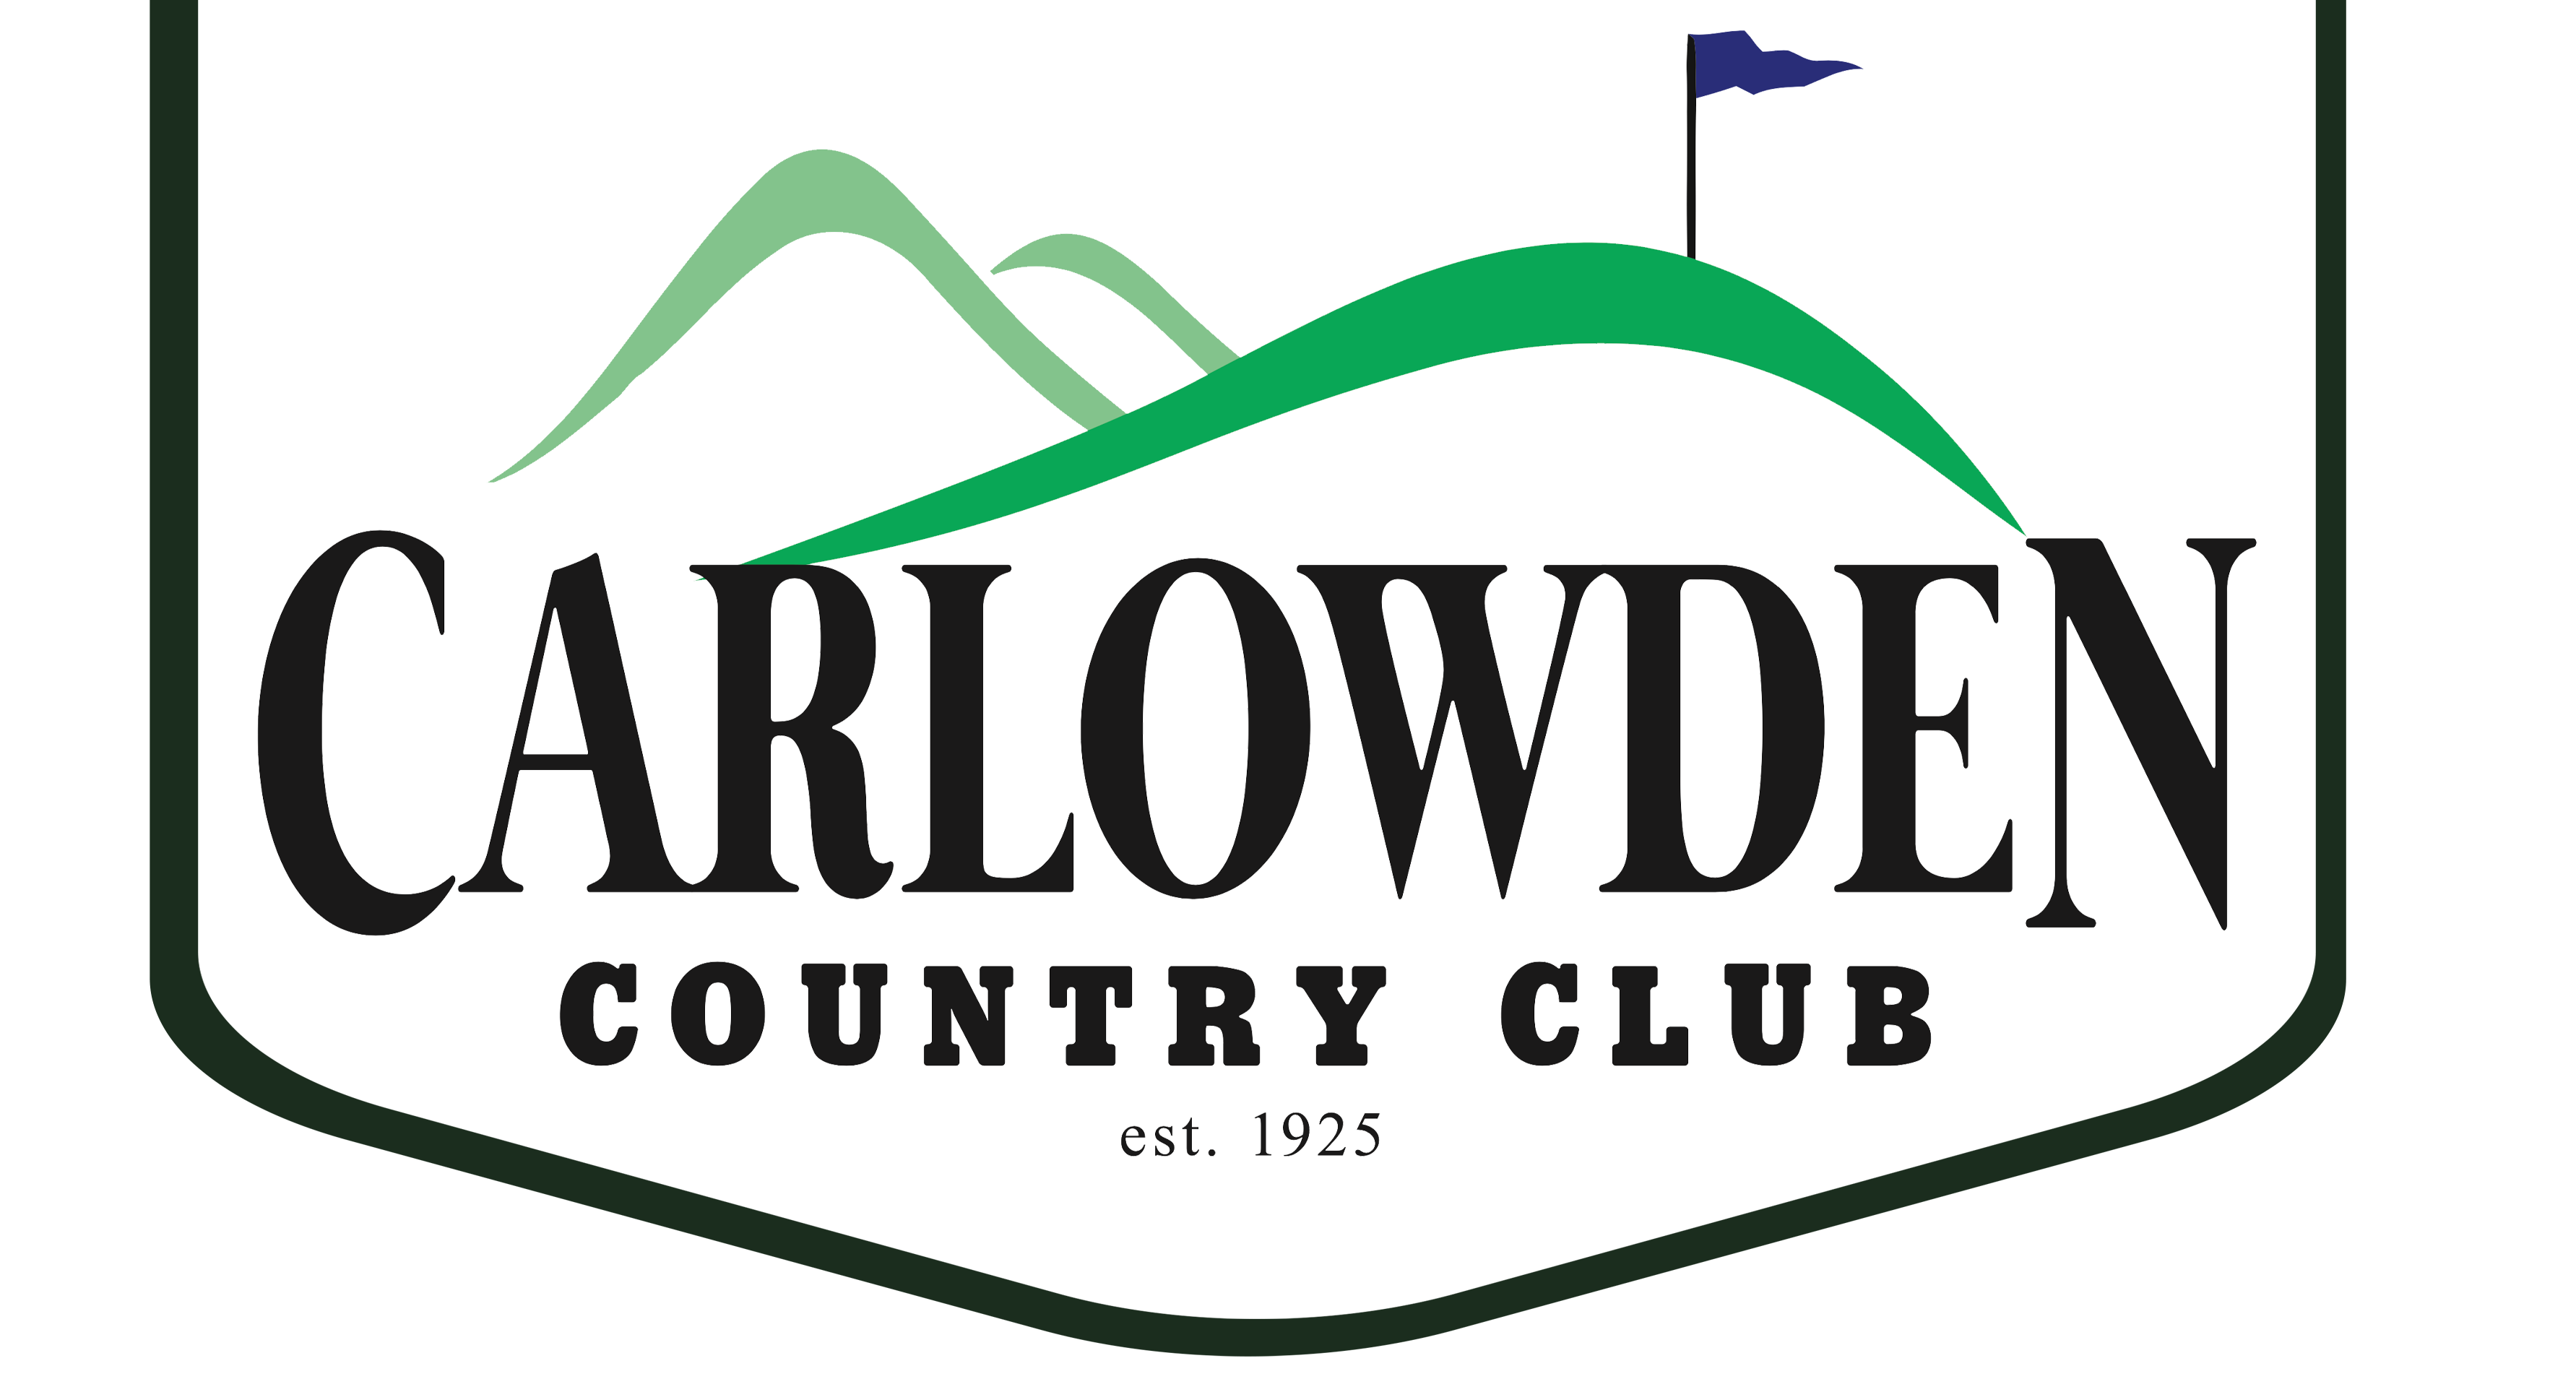 Carlowden Country Club (Cathage): $50 for $30